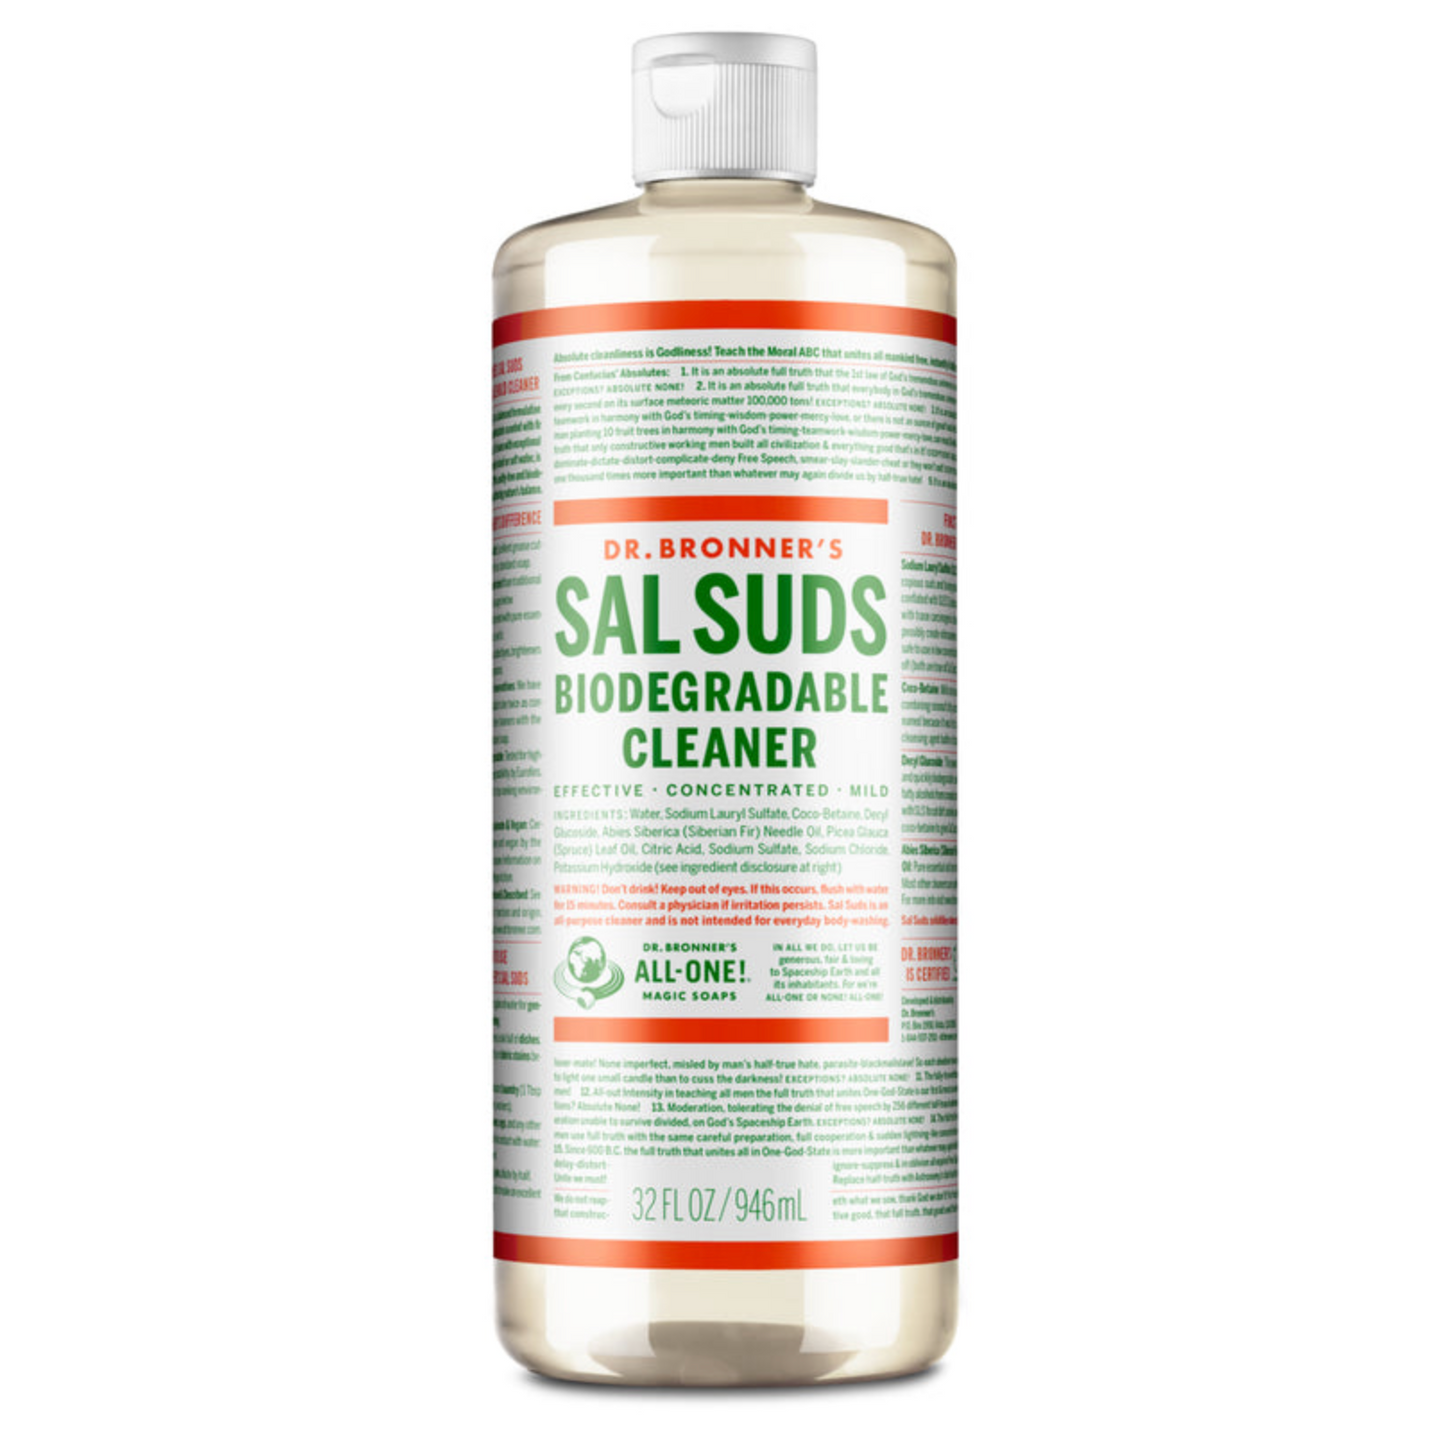 Dr Bronner's Sal Suds 473ml Or 946ml, Biodegradable Cleaner